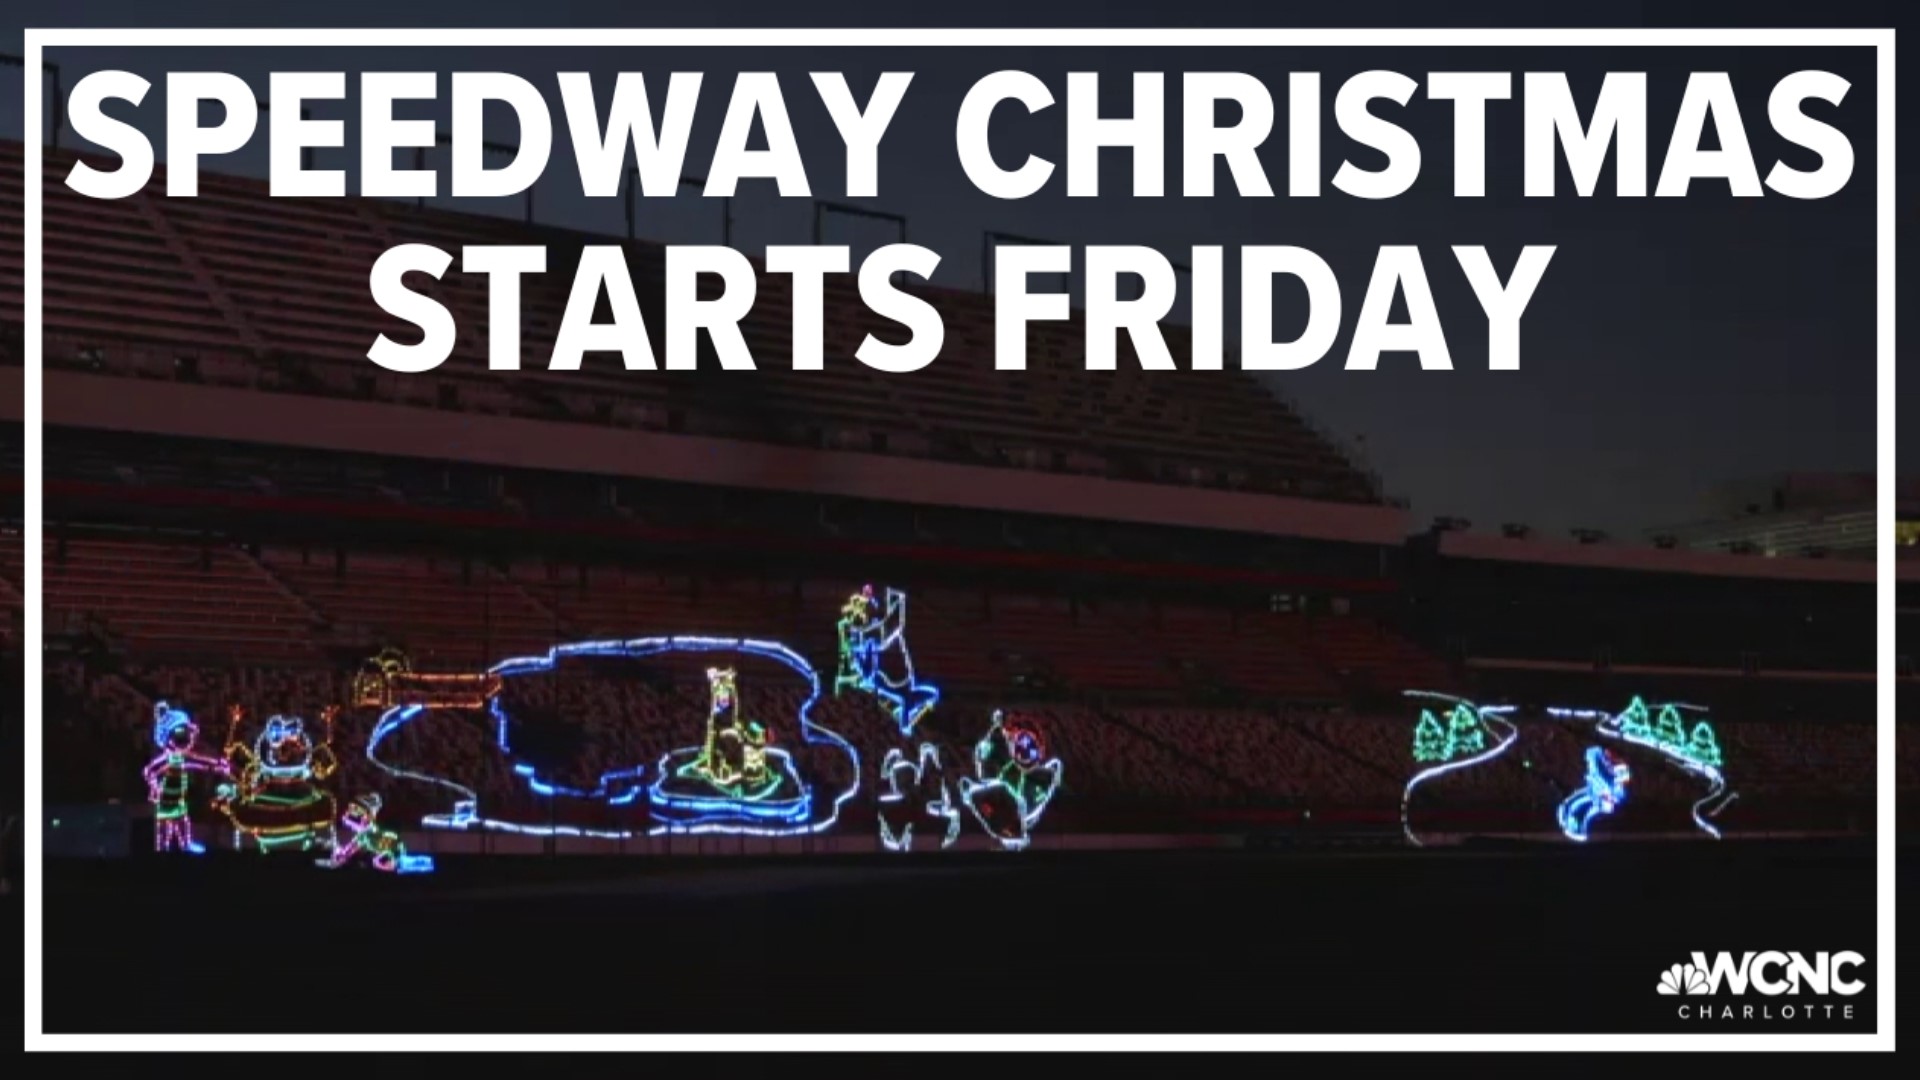 One of the Charlotte area's biggest holiday traditions is almost here. Speedway Christmas at Charlotte Motor Speedway starts Friday, Nov. 18.